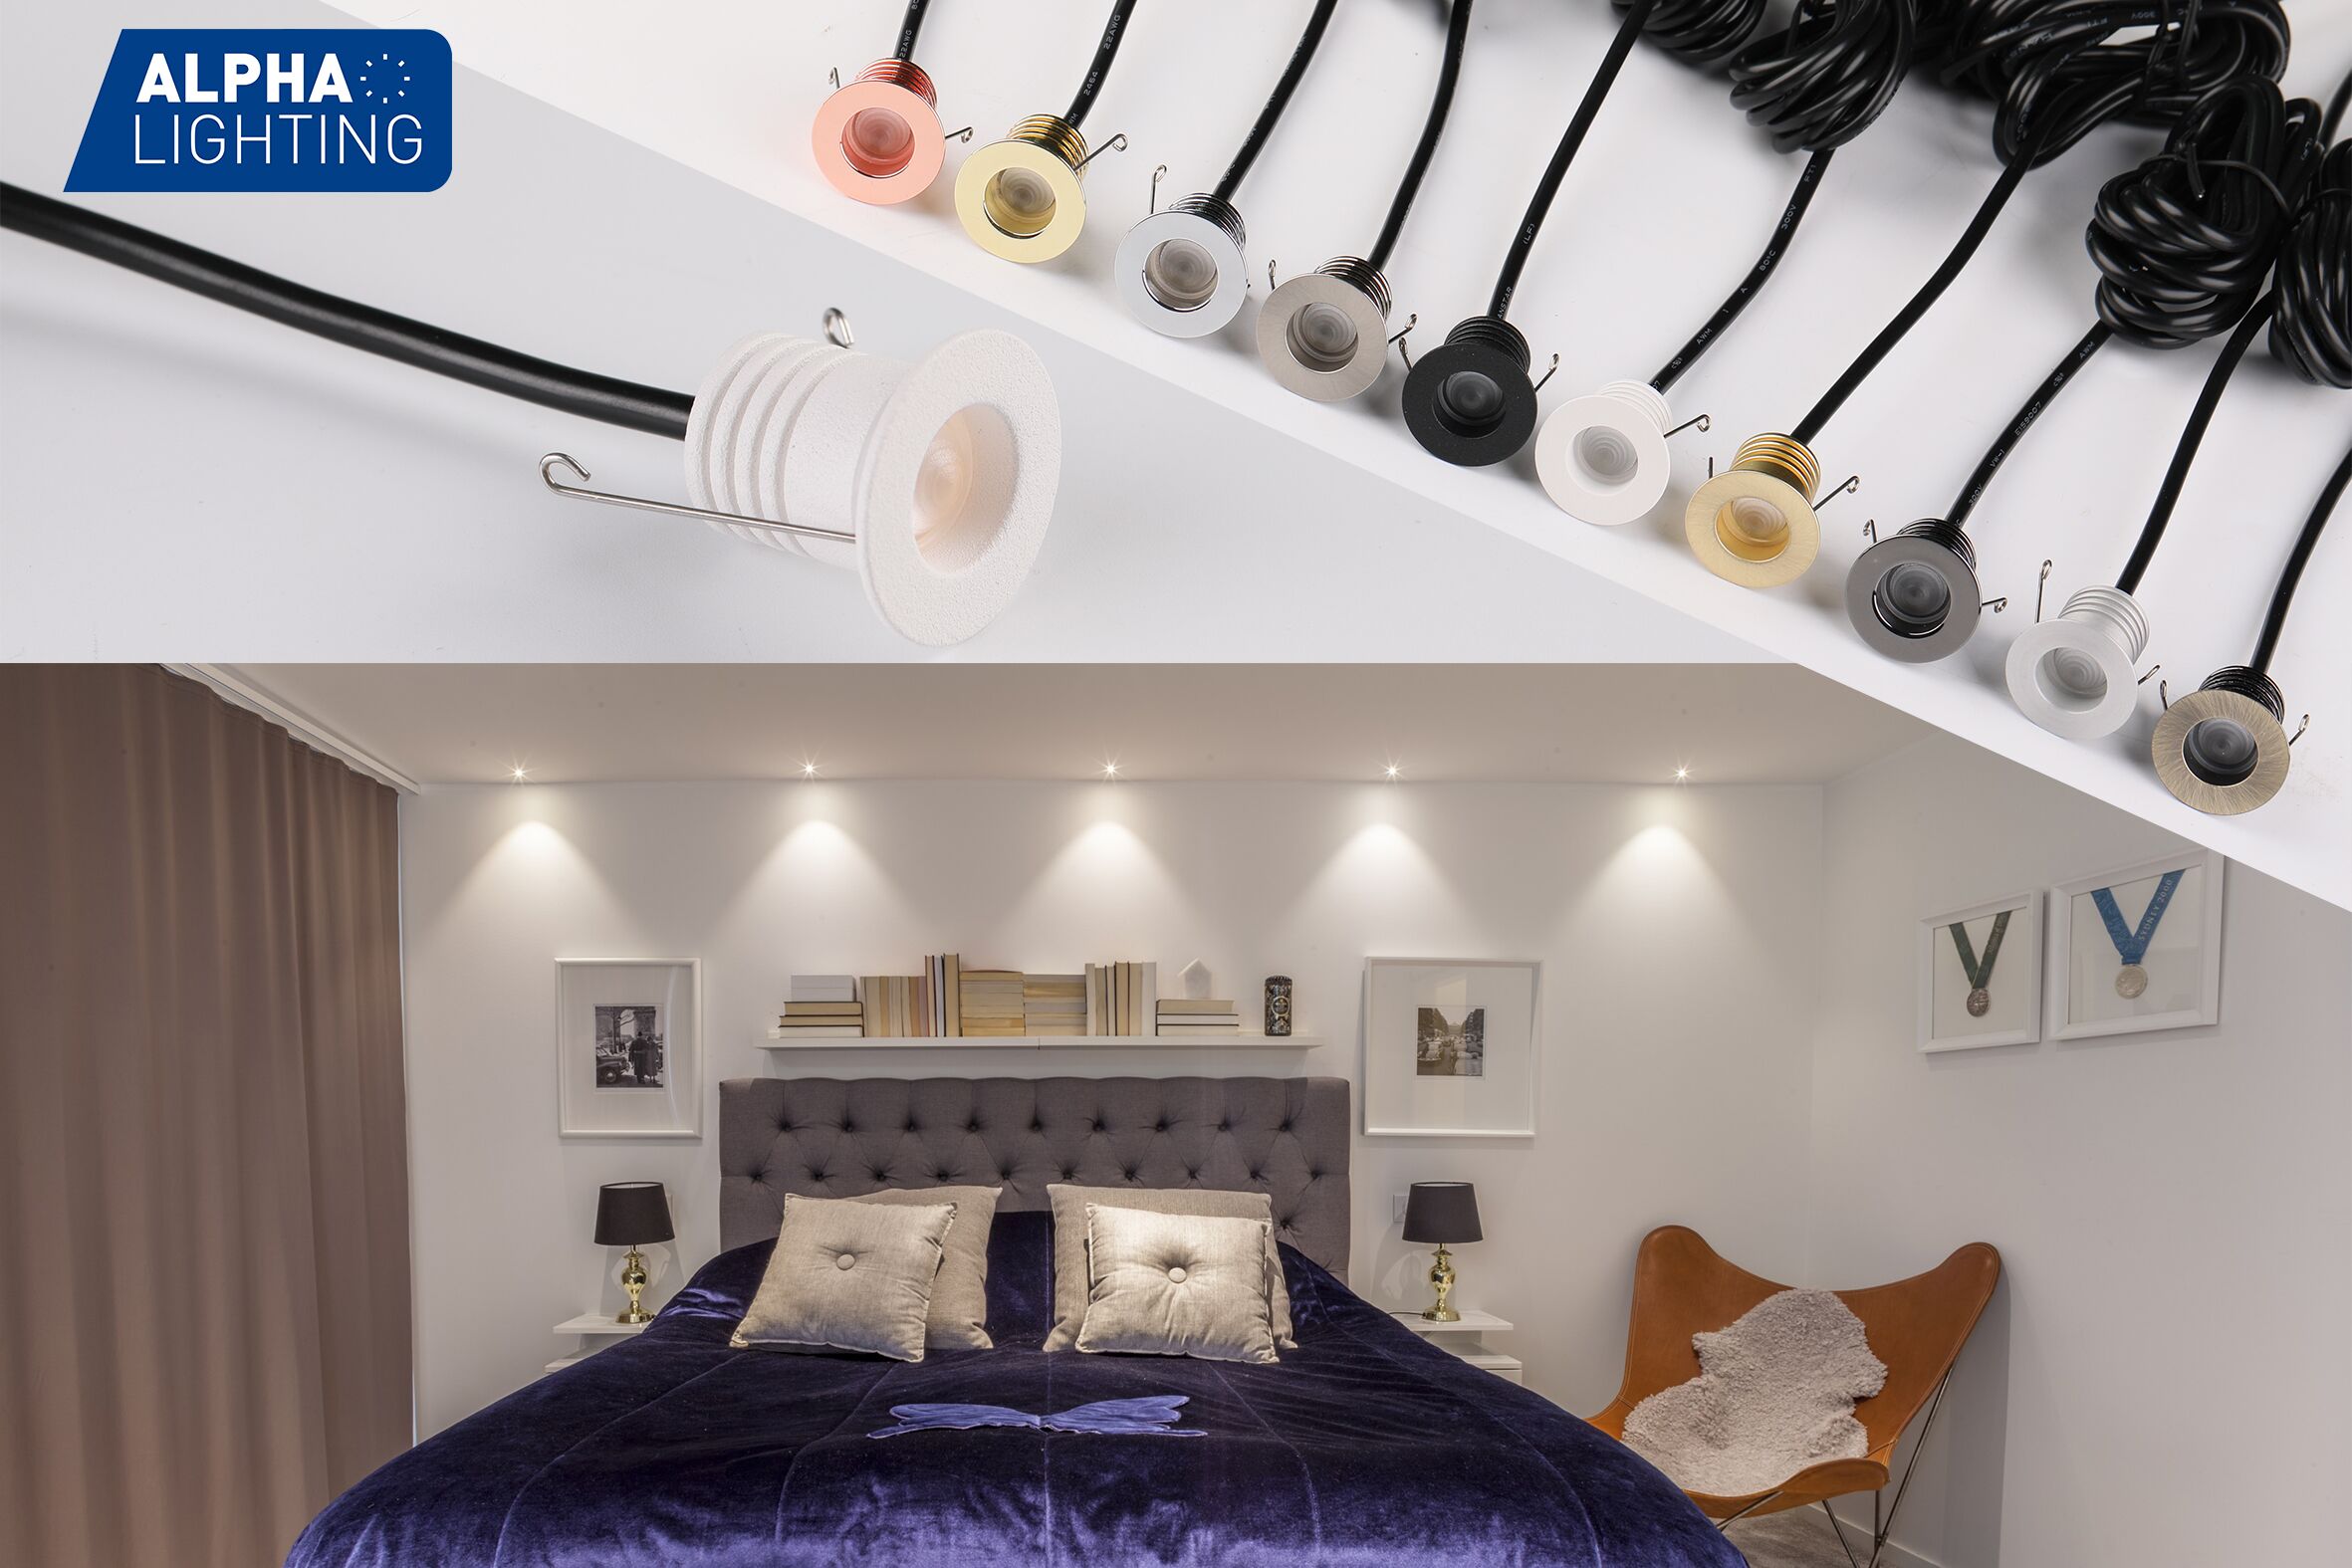 The differences Between Downlight Color Temperature